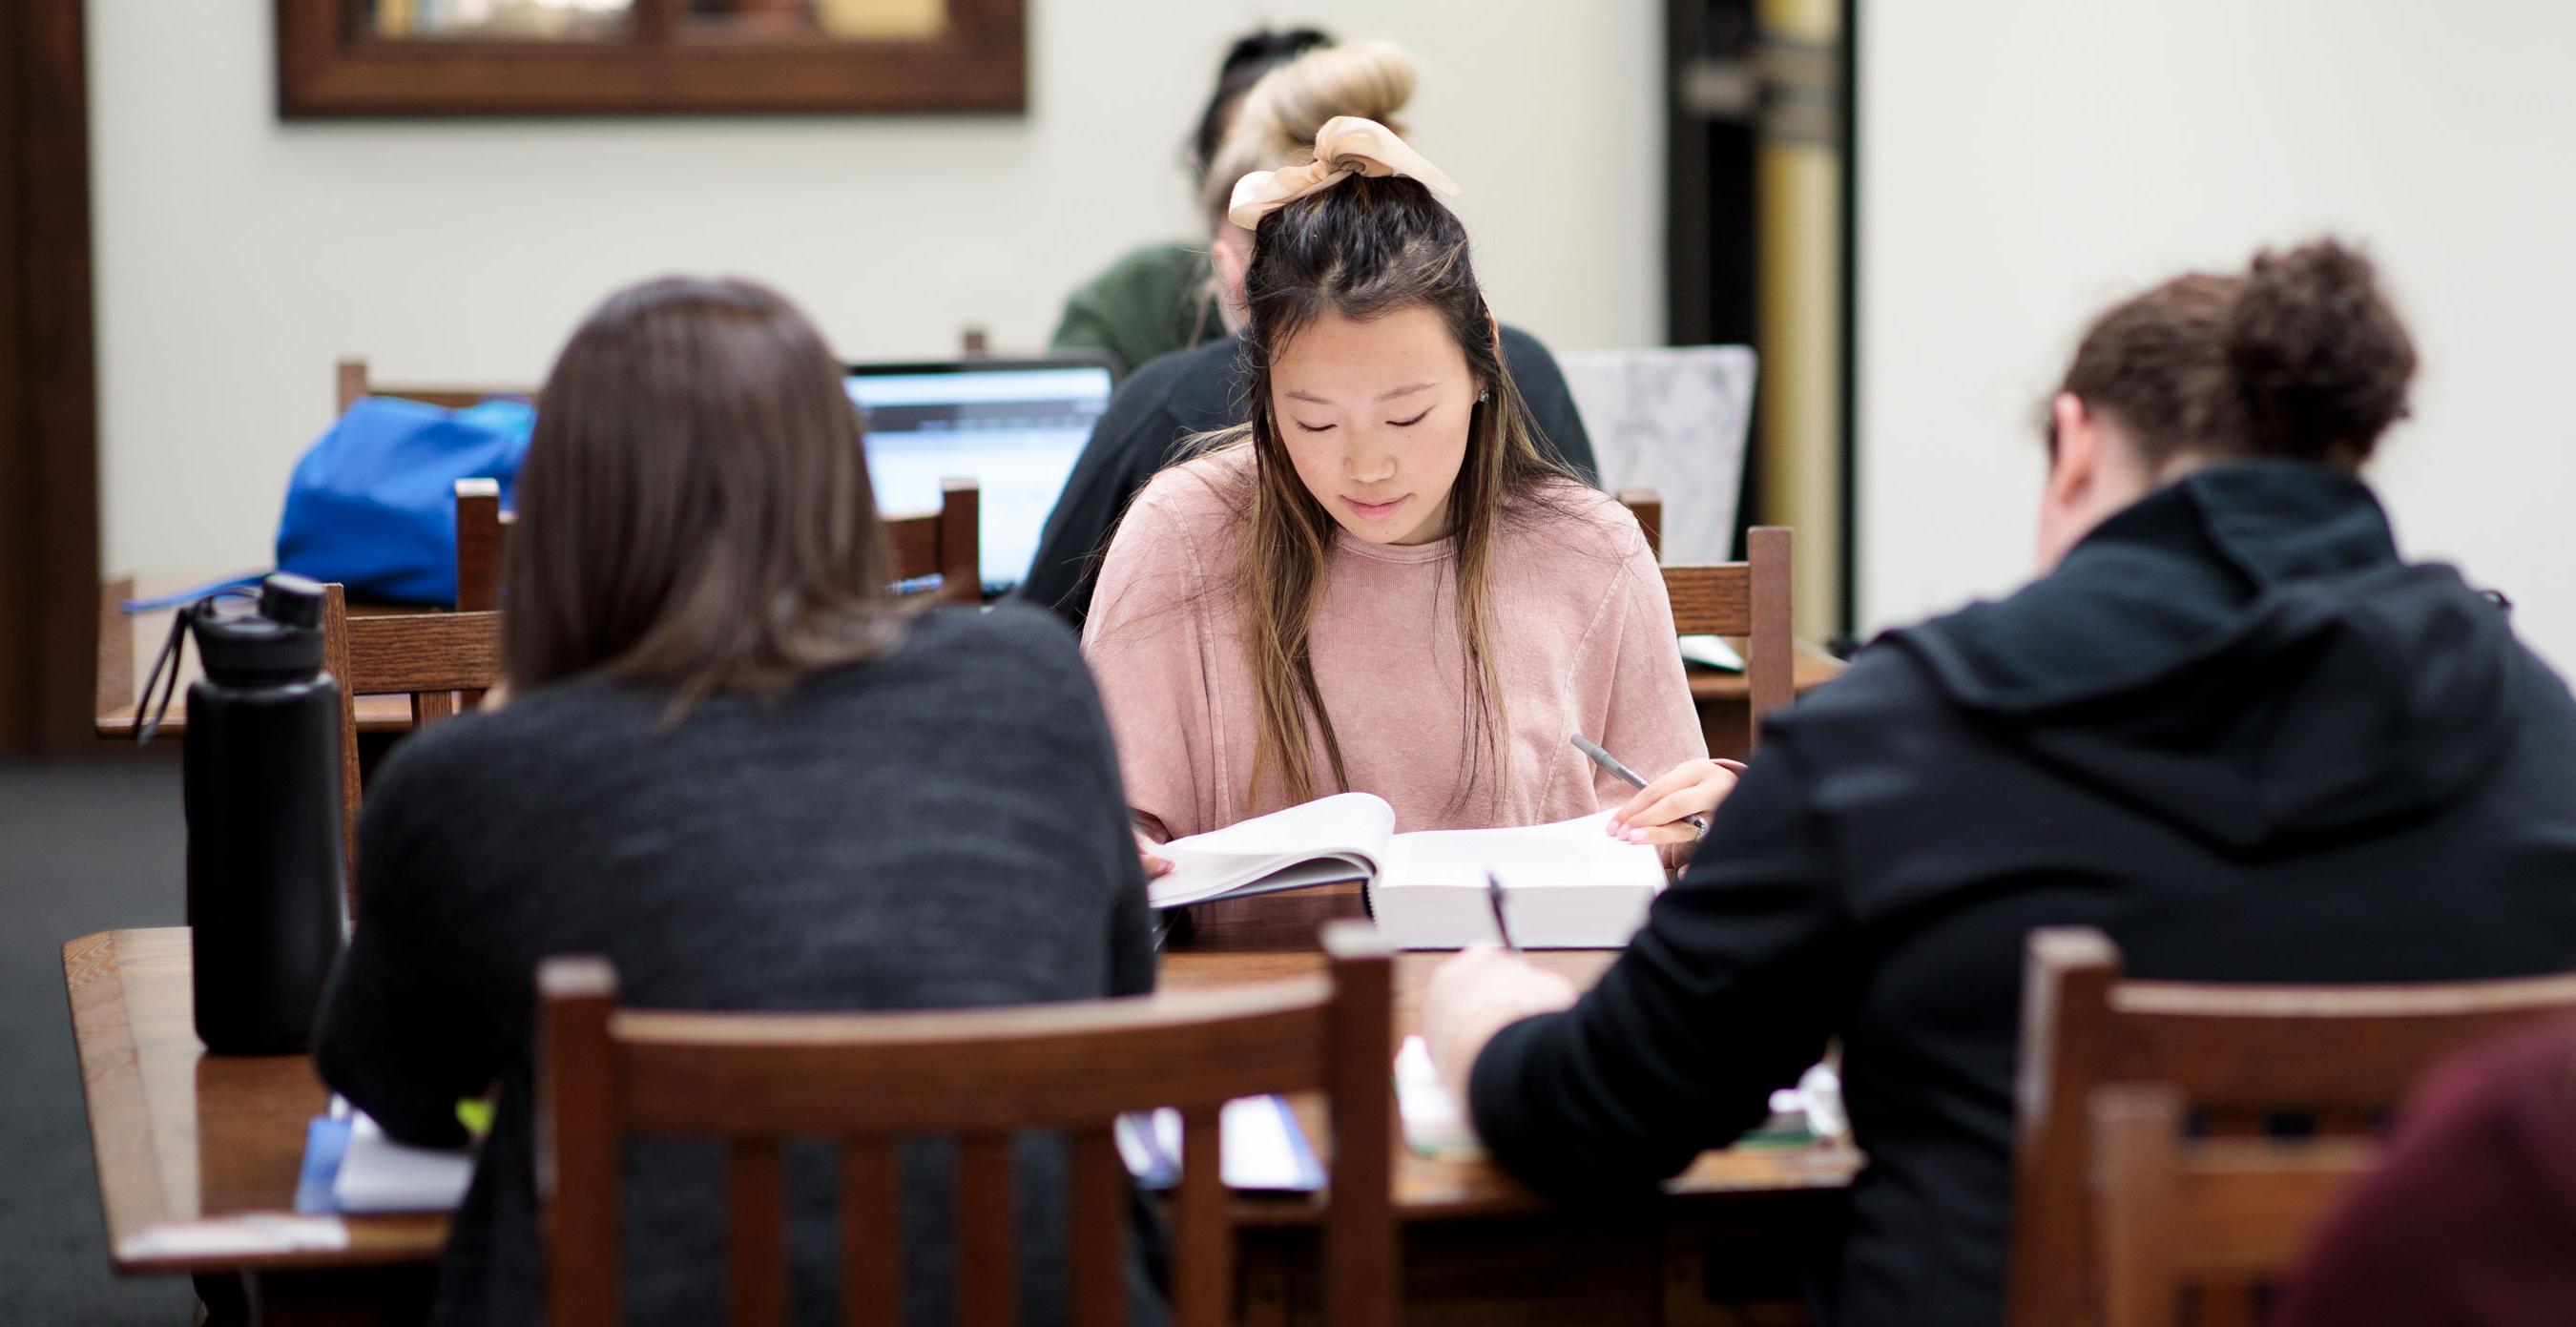 Students studying for exams in the library on campus.